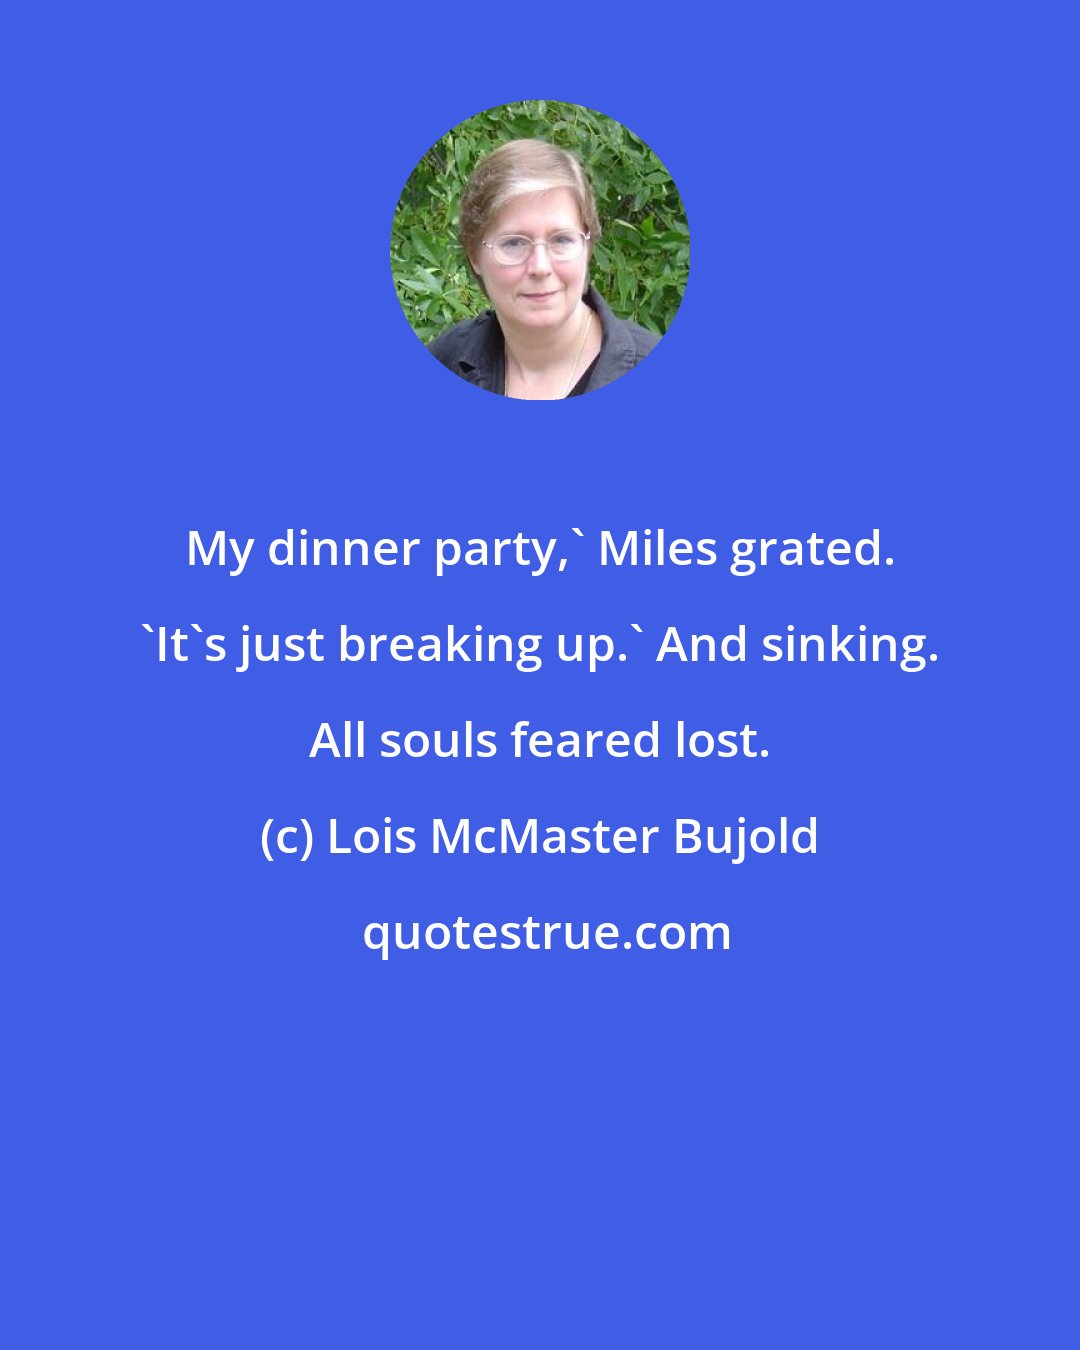 Lois McMaster Bujold: My dinner party,' Miles grated. 'It's just breaking up.' And sinking. All souls feared lost.